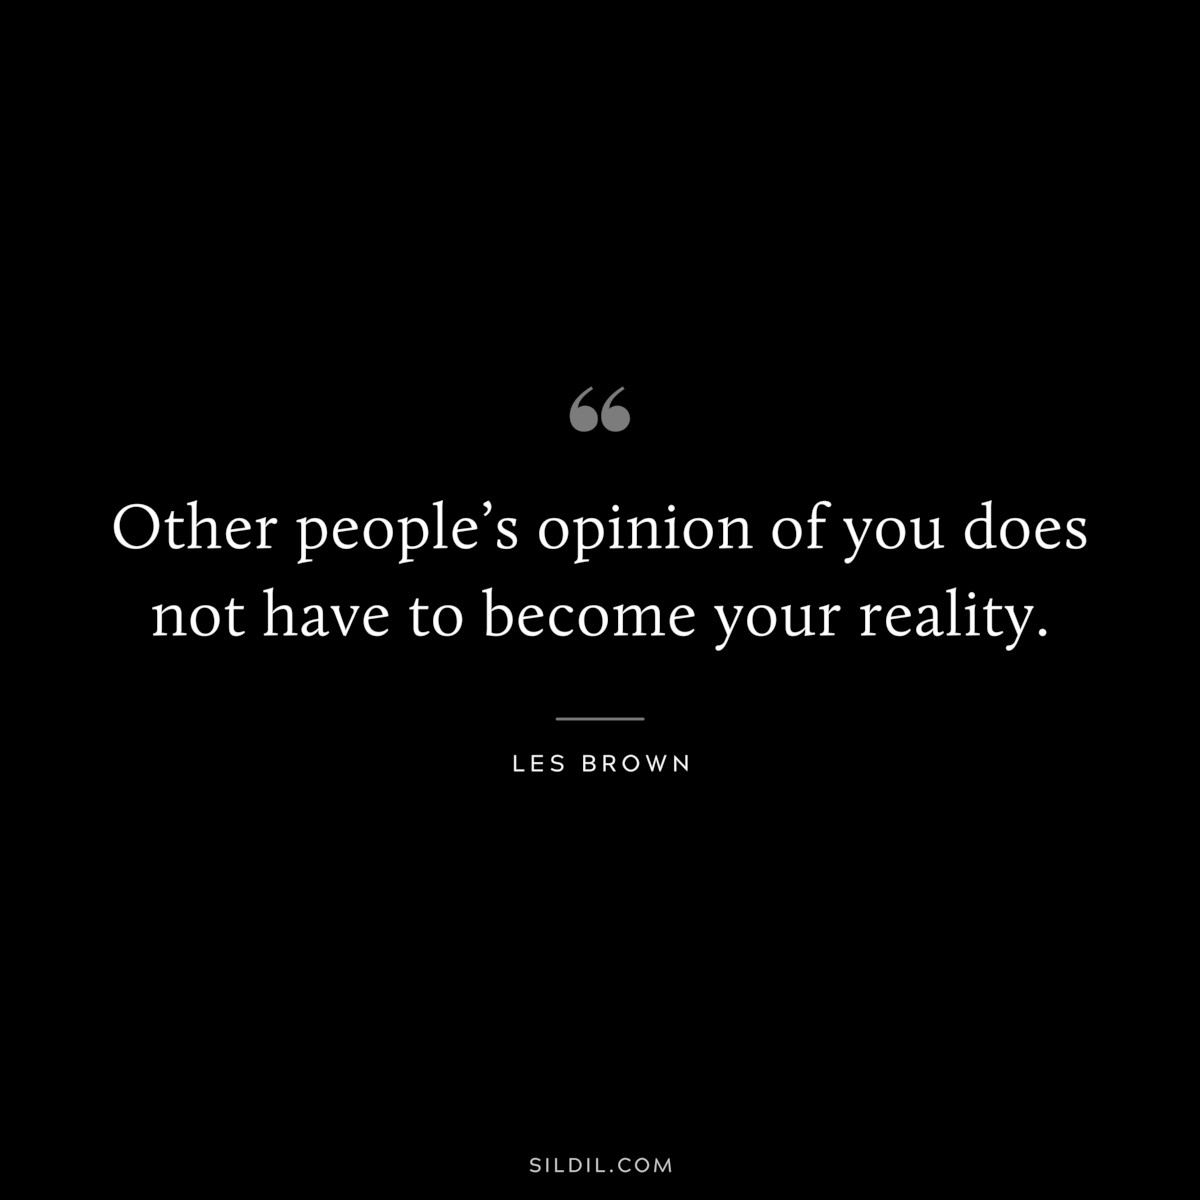 Other people’s opinion of you does not have to become your reality. ― Les Brown